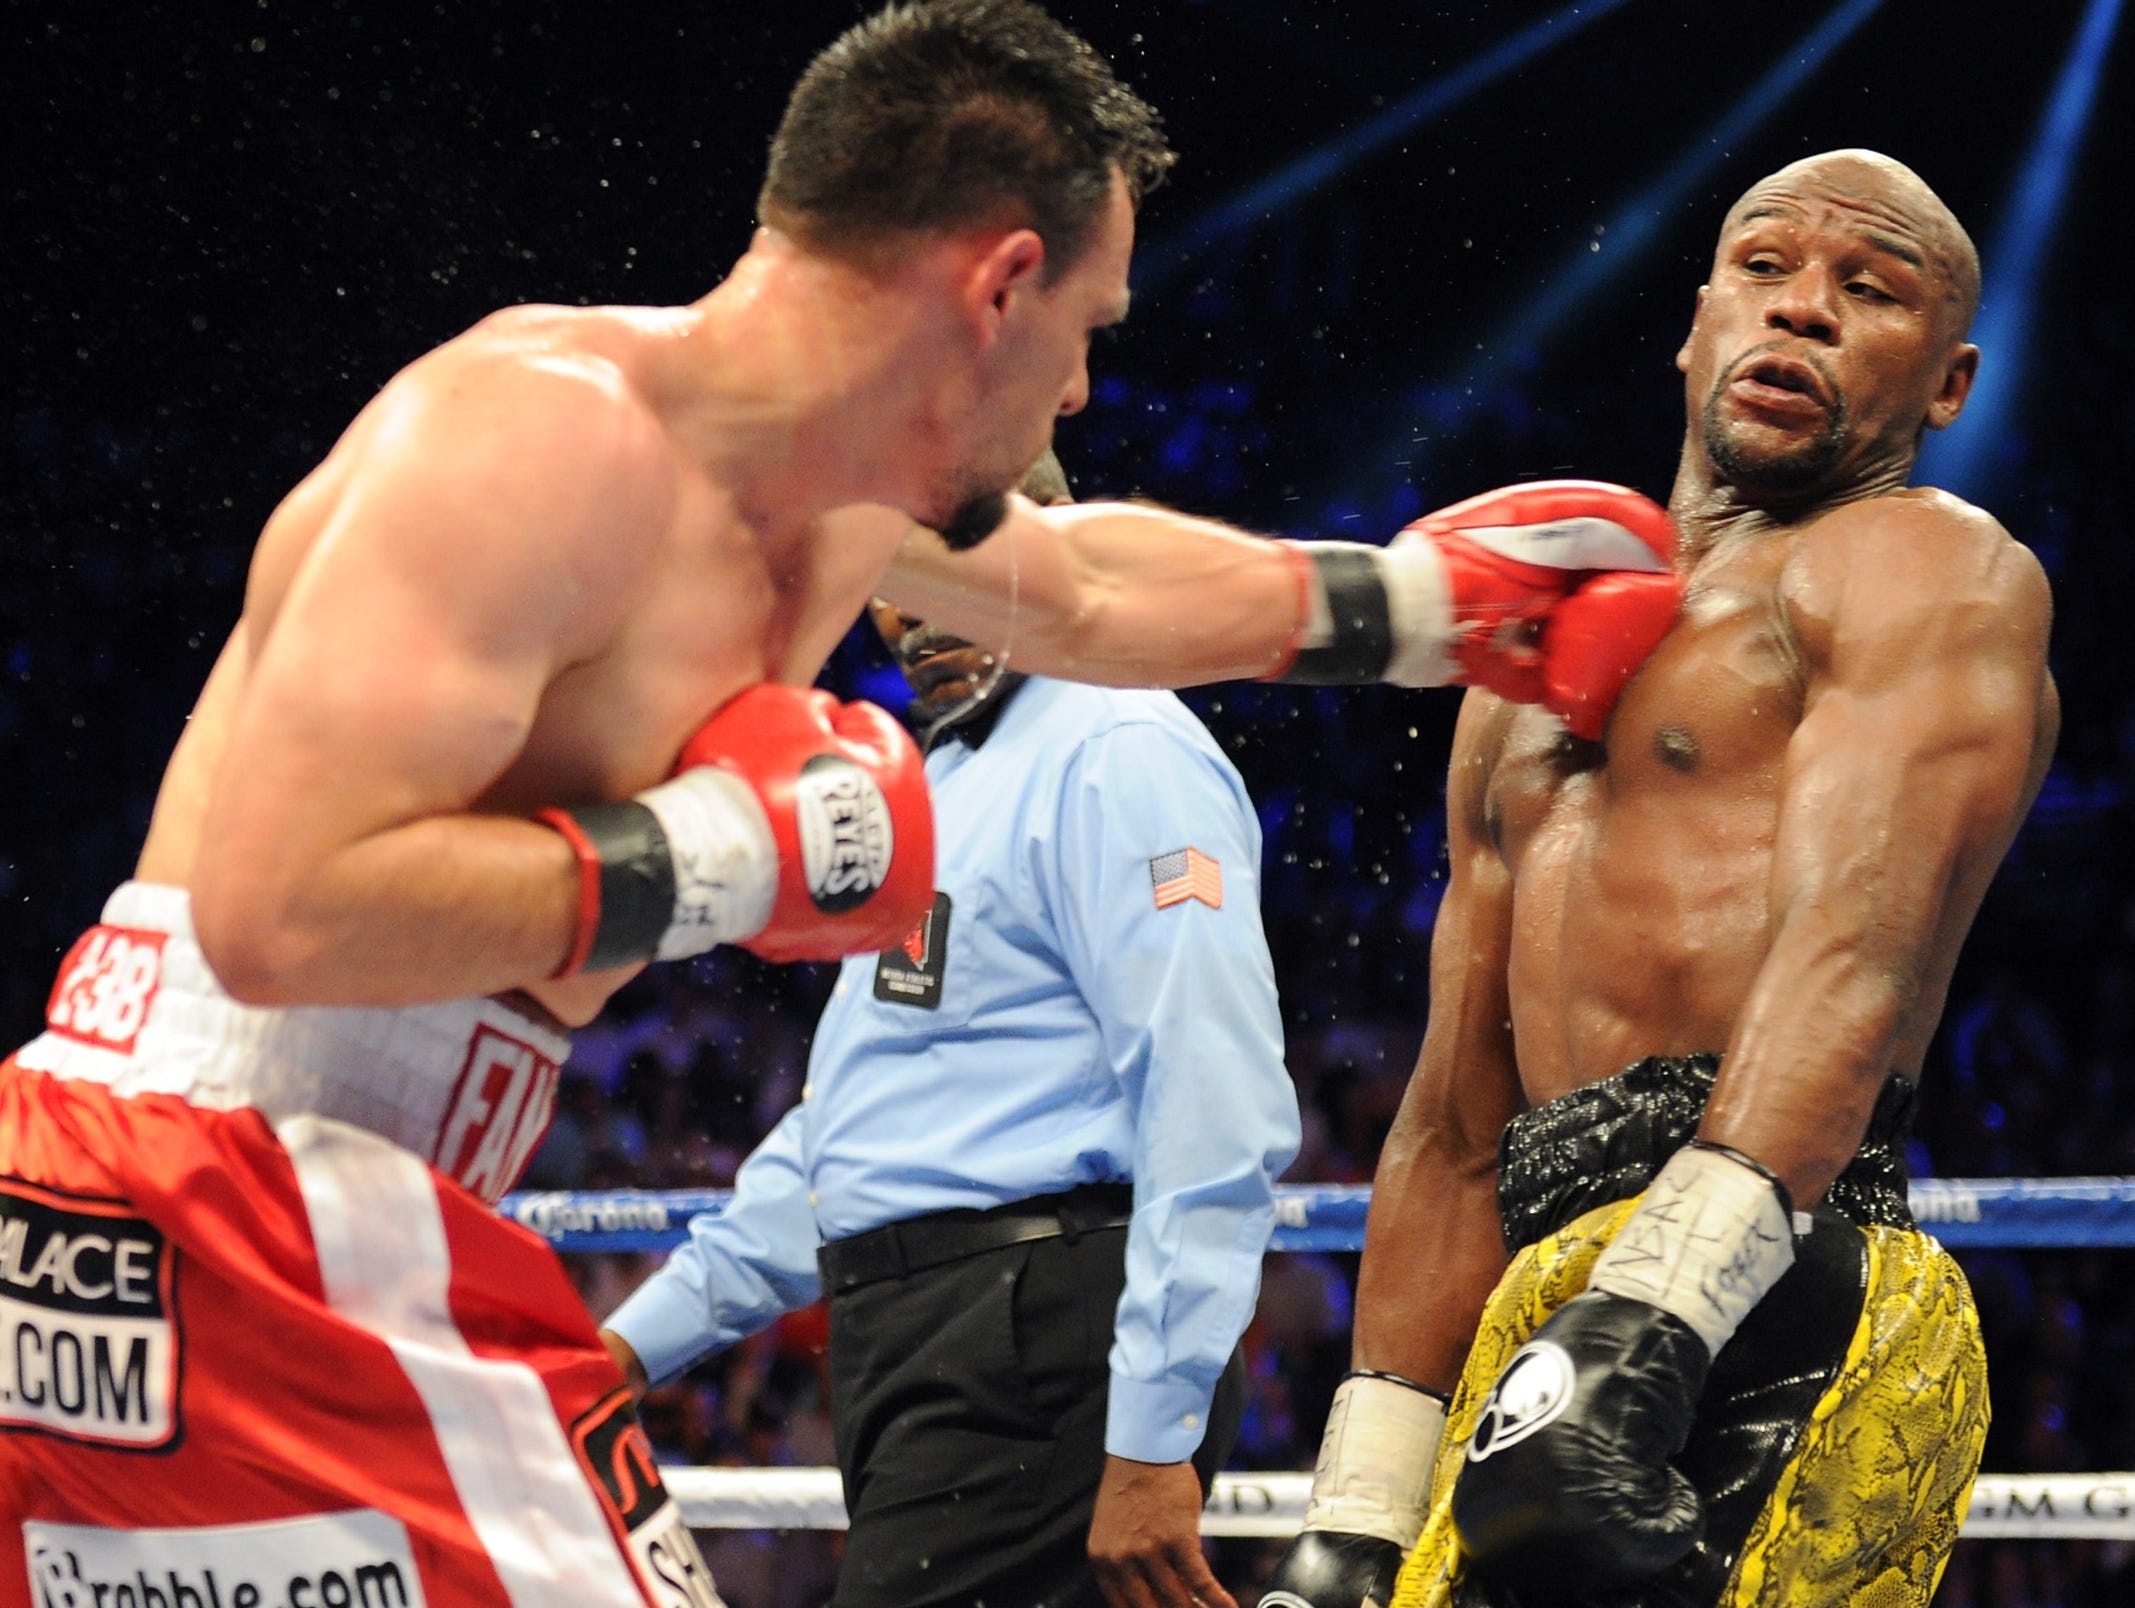 Showtime boss: MAYWEATHER FIGHT exceeds 1M PPV buys